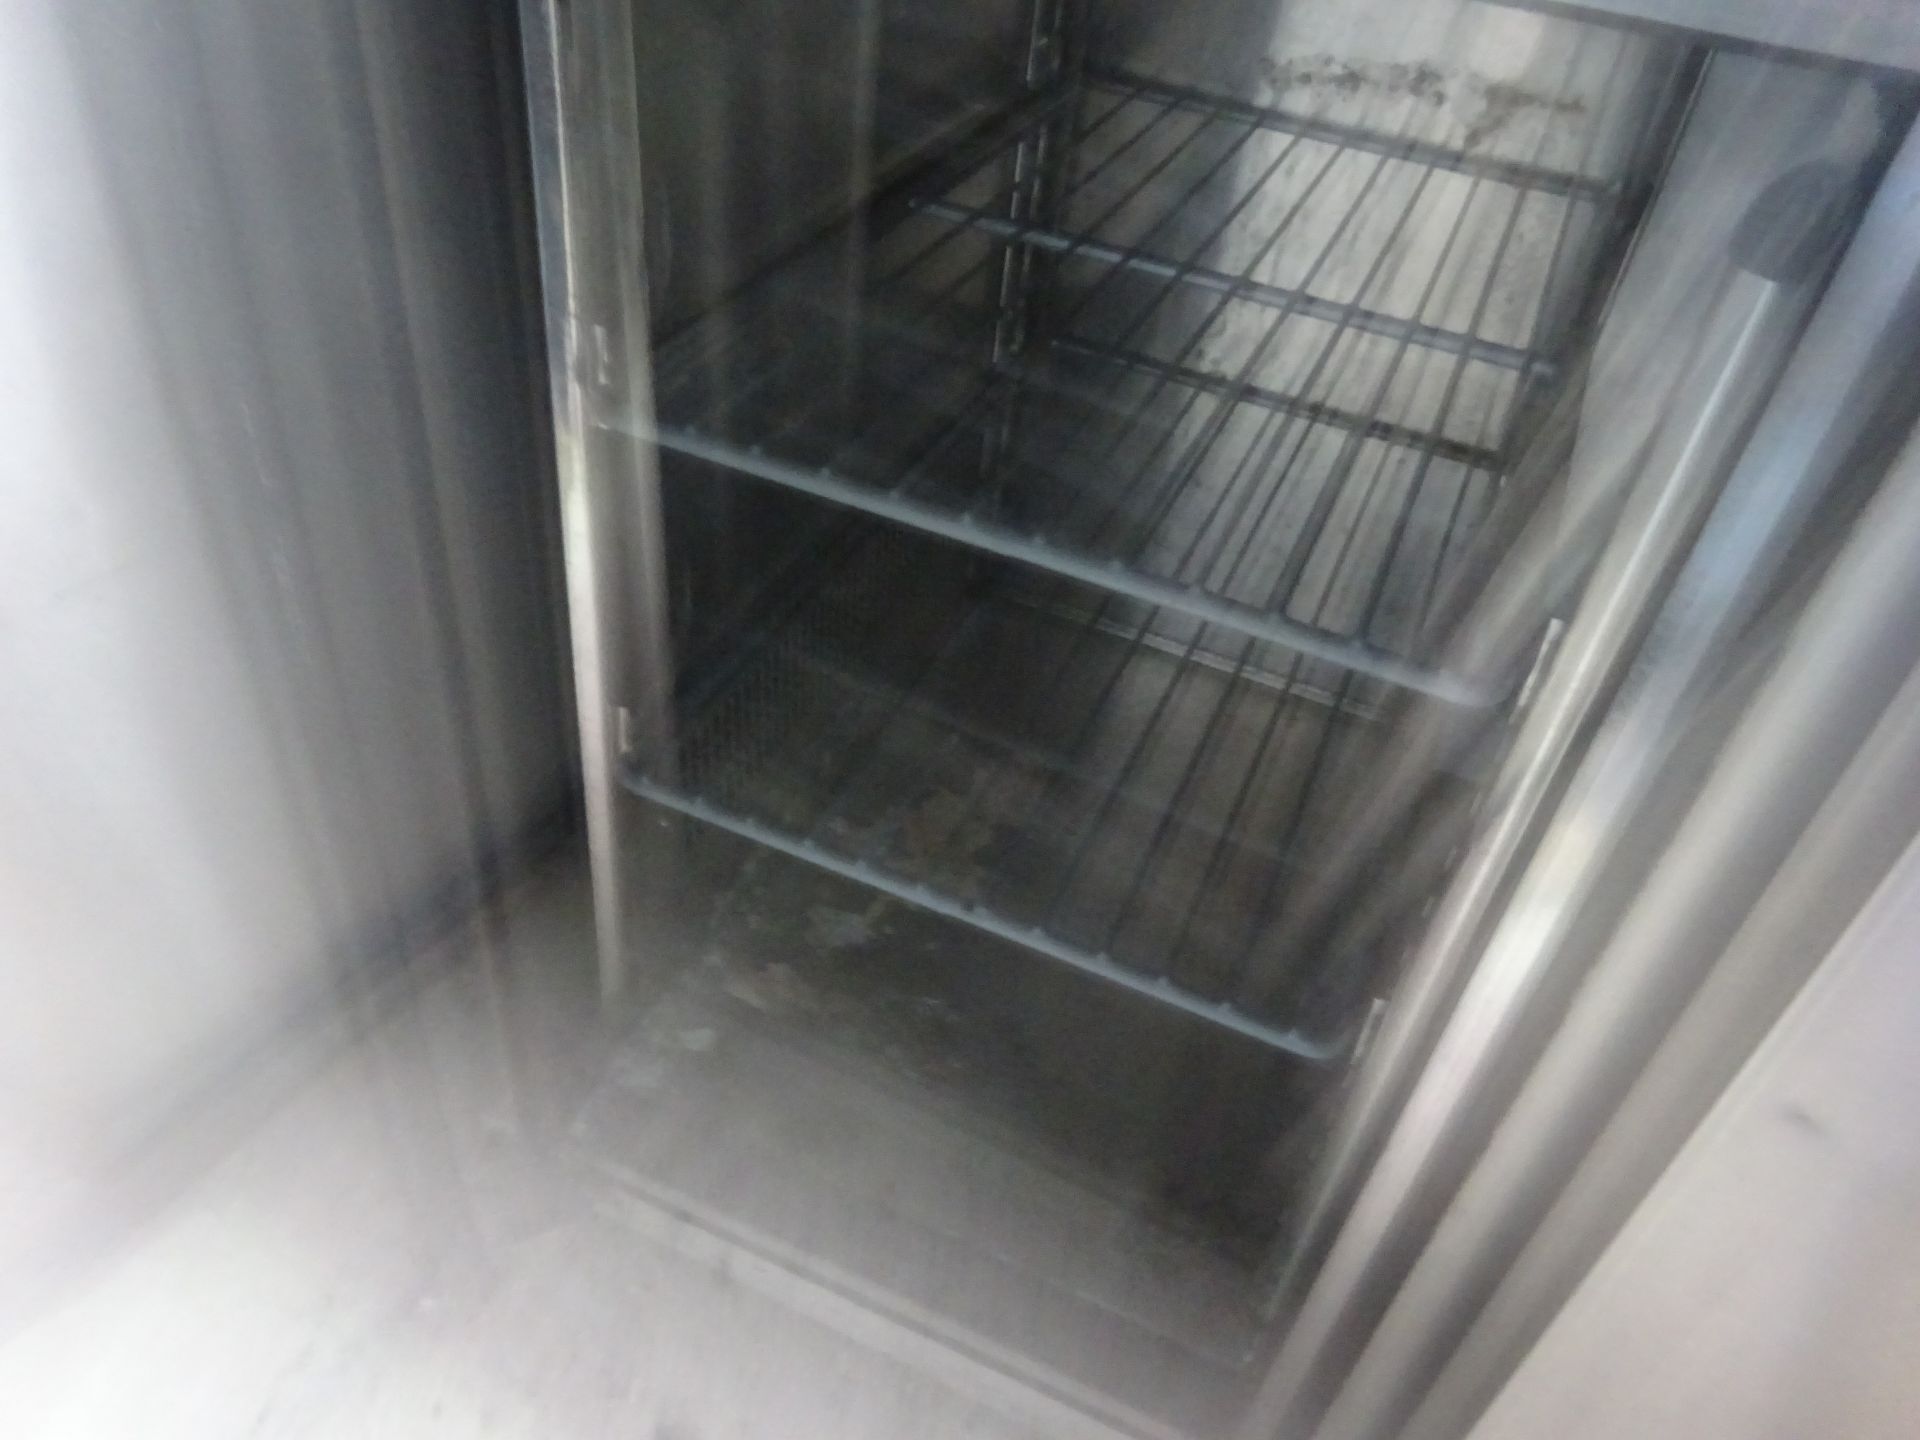 Foster three door under counter fridge, 240v, width 186cms, depth 70cms and height 86cms. - Image 2 of 5